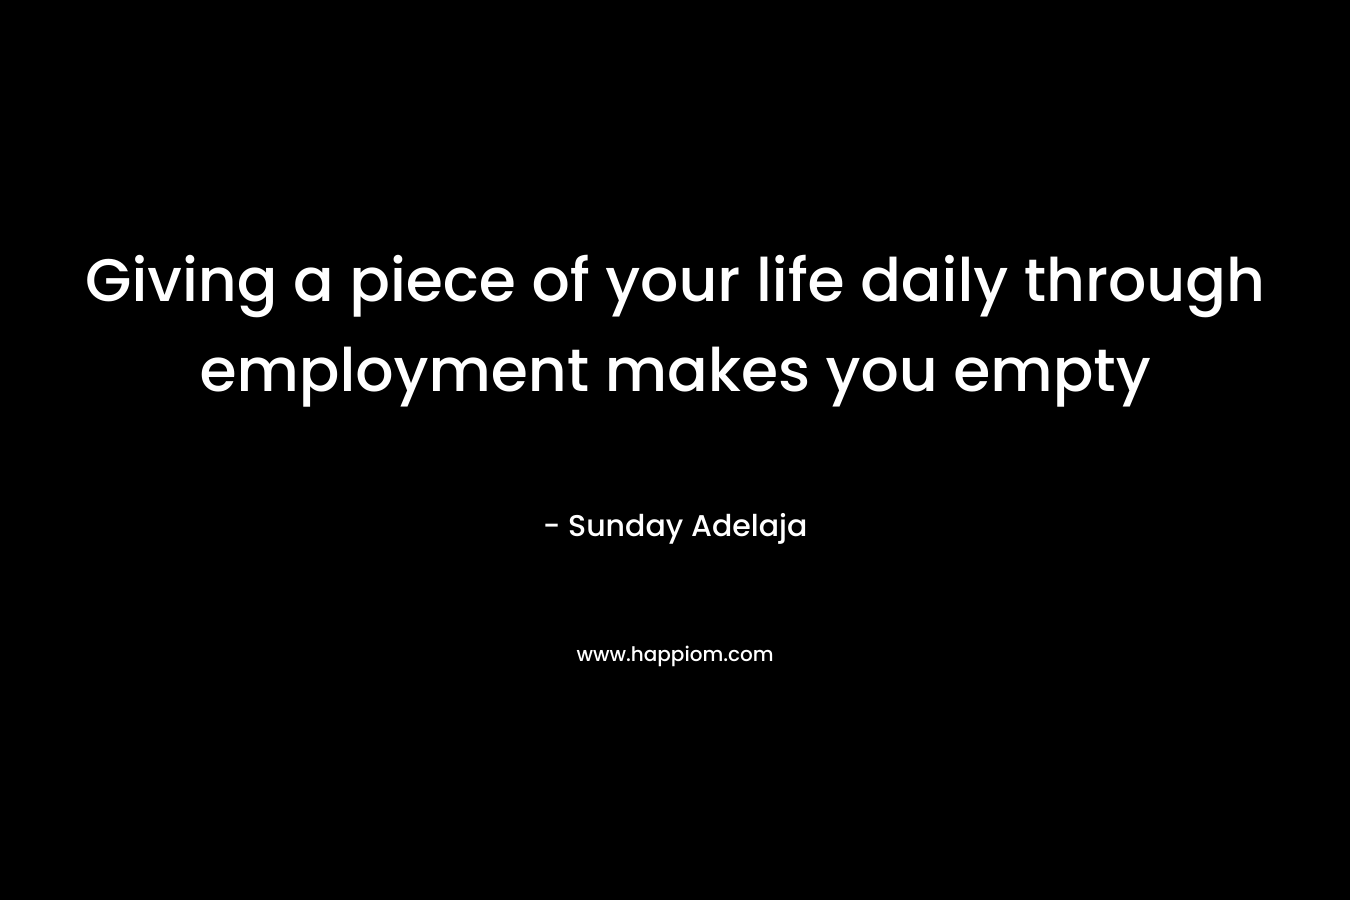 Giving a piece of your life daily through employment makes you empty